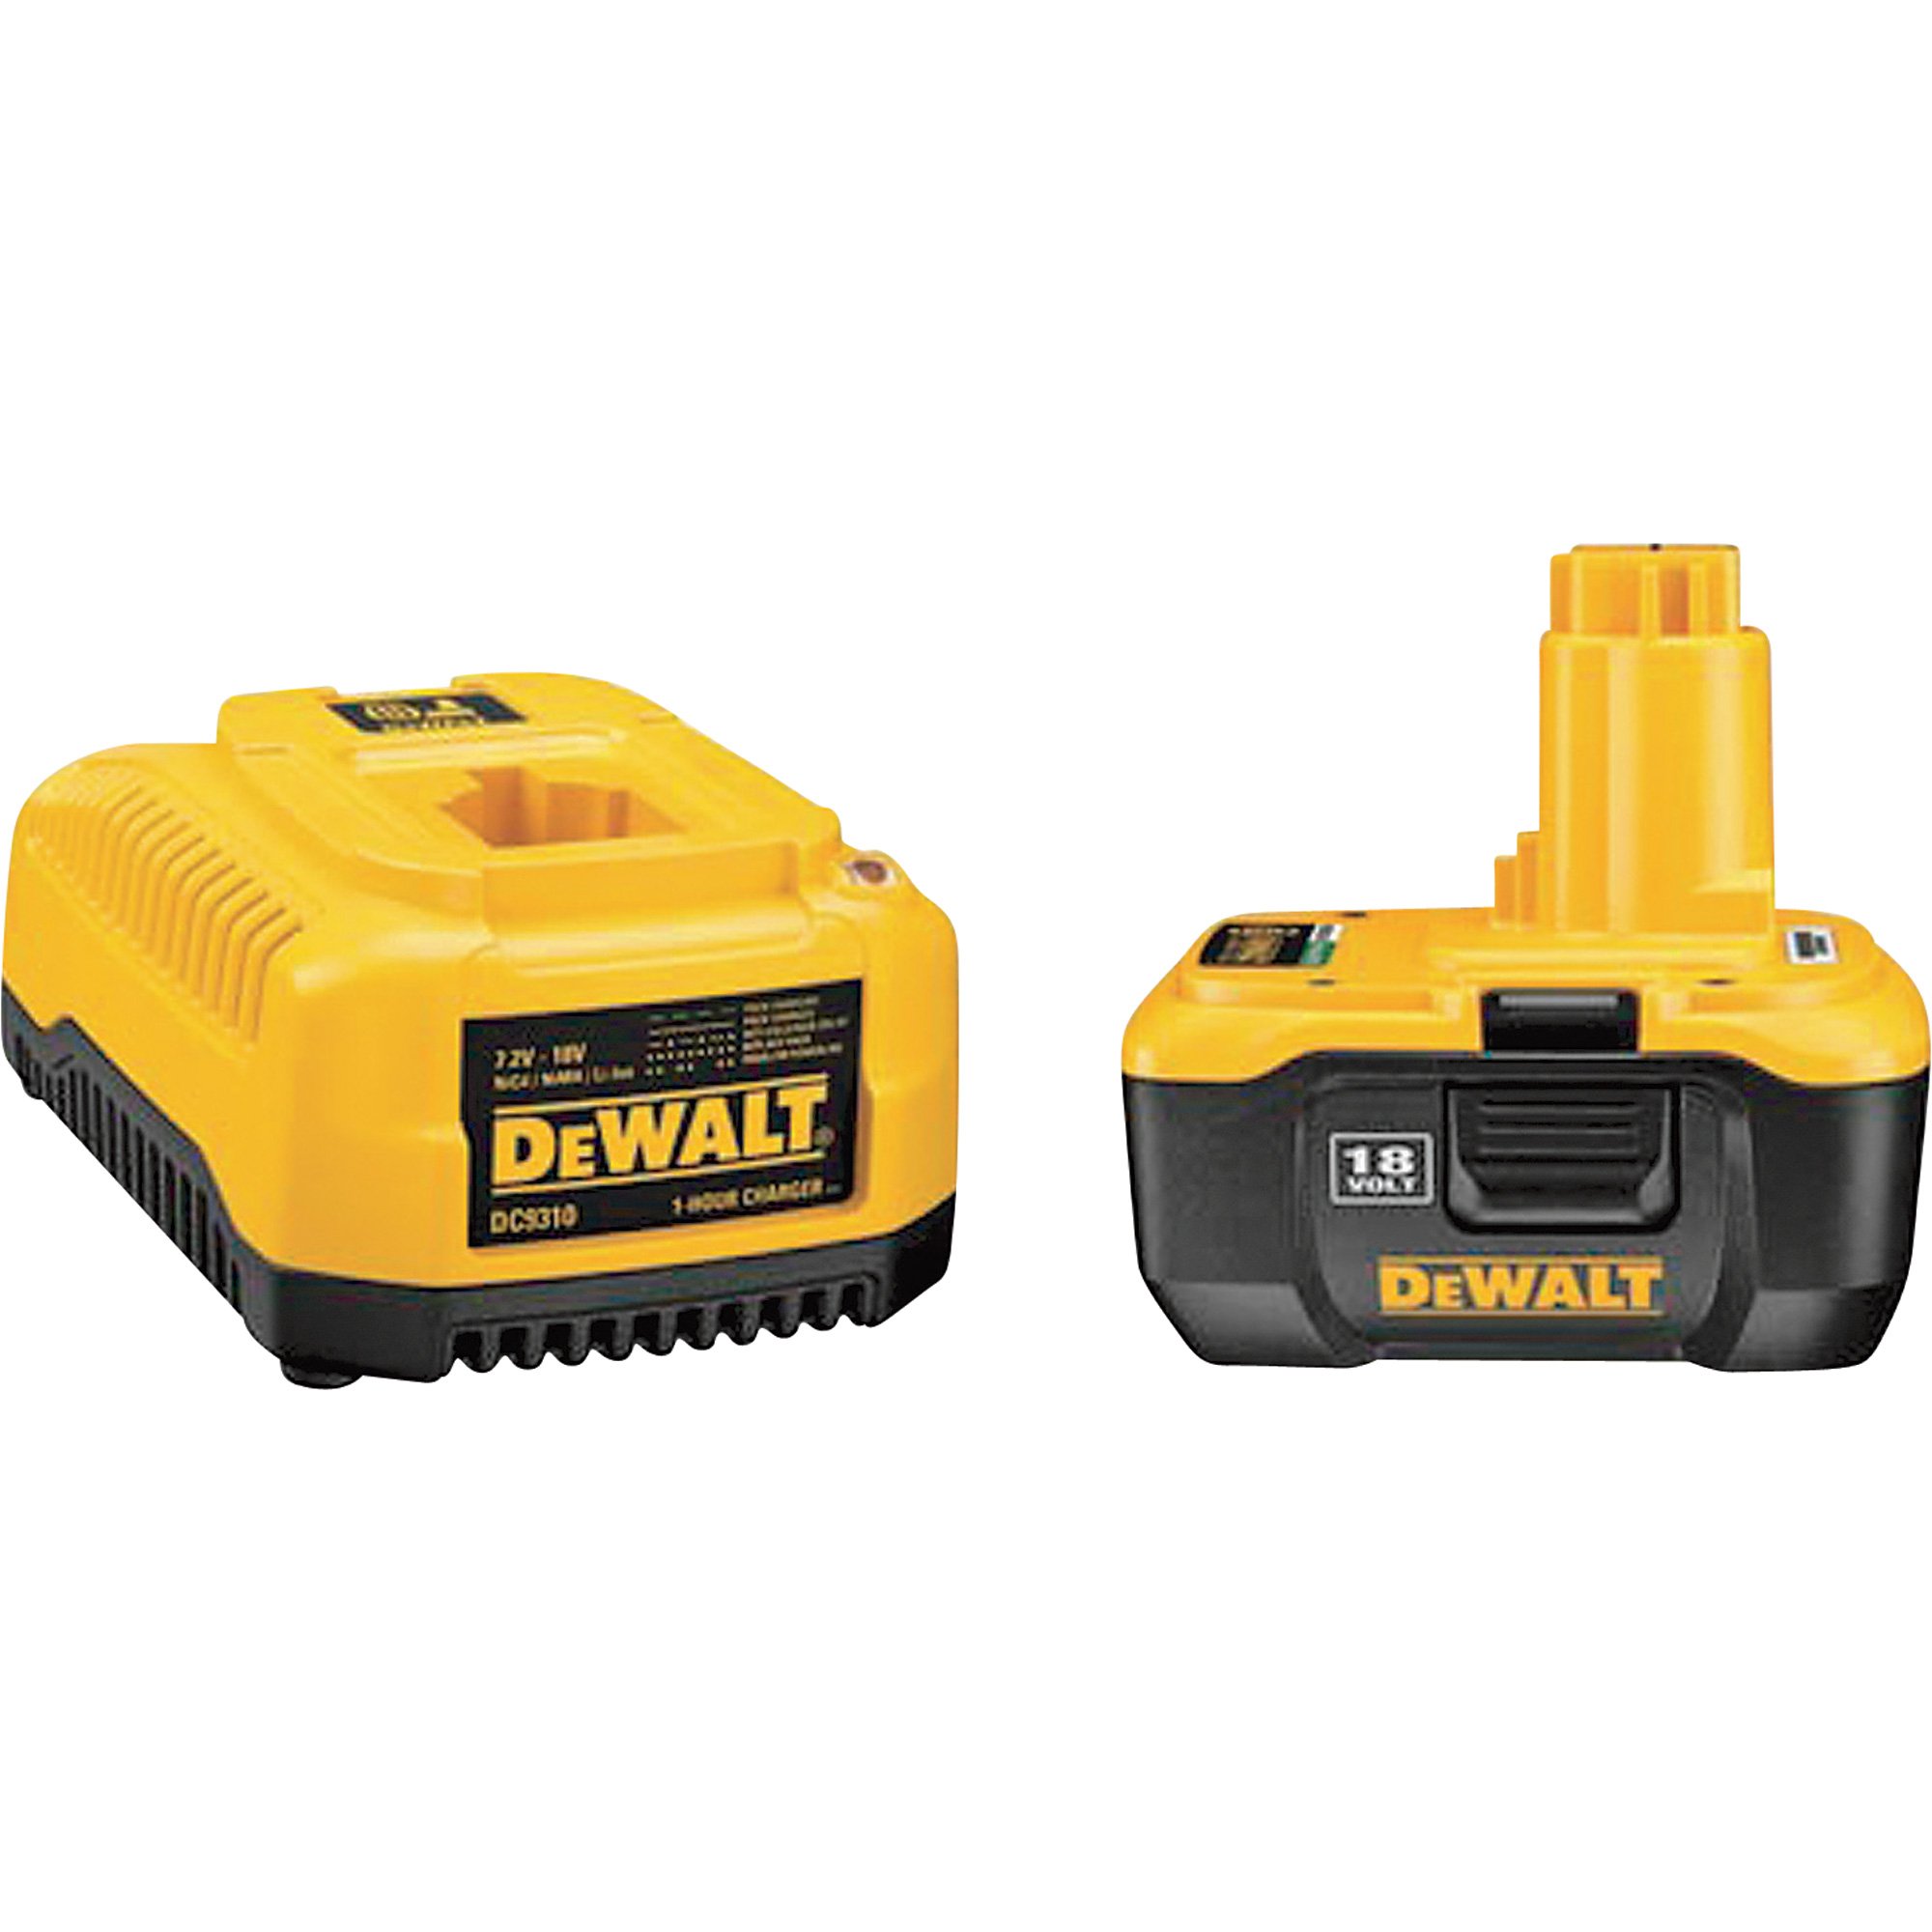 DEWALT Heavy-Duty 1-Hour Charger and 18V Battery Pack with NANO Technology,  Model# DC9180C